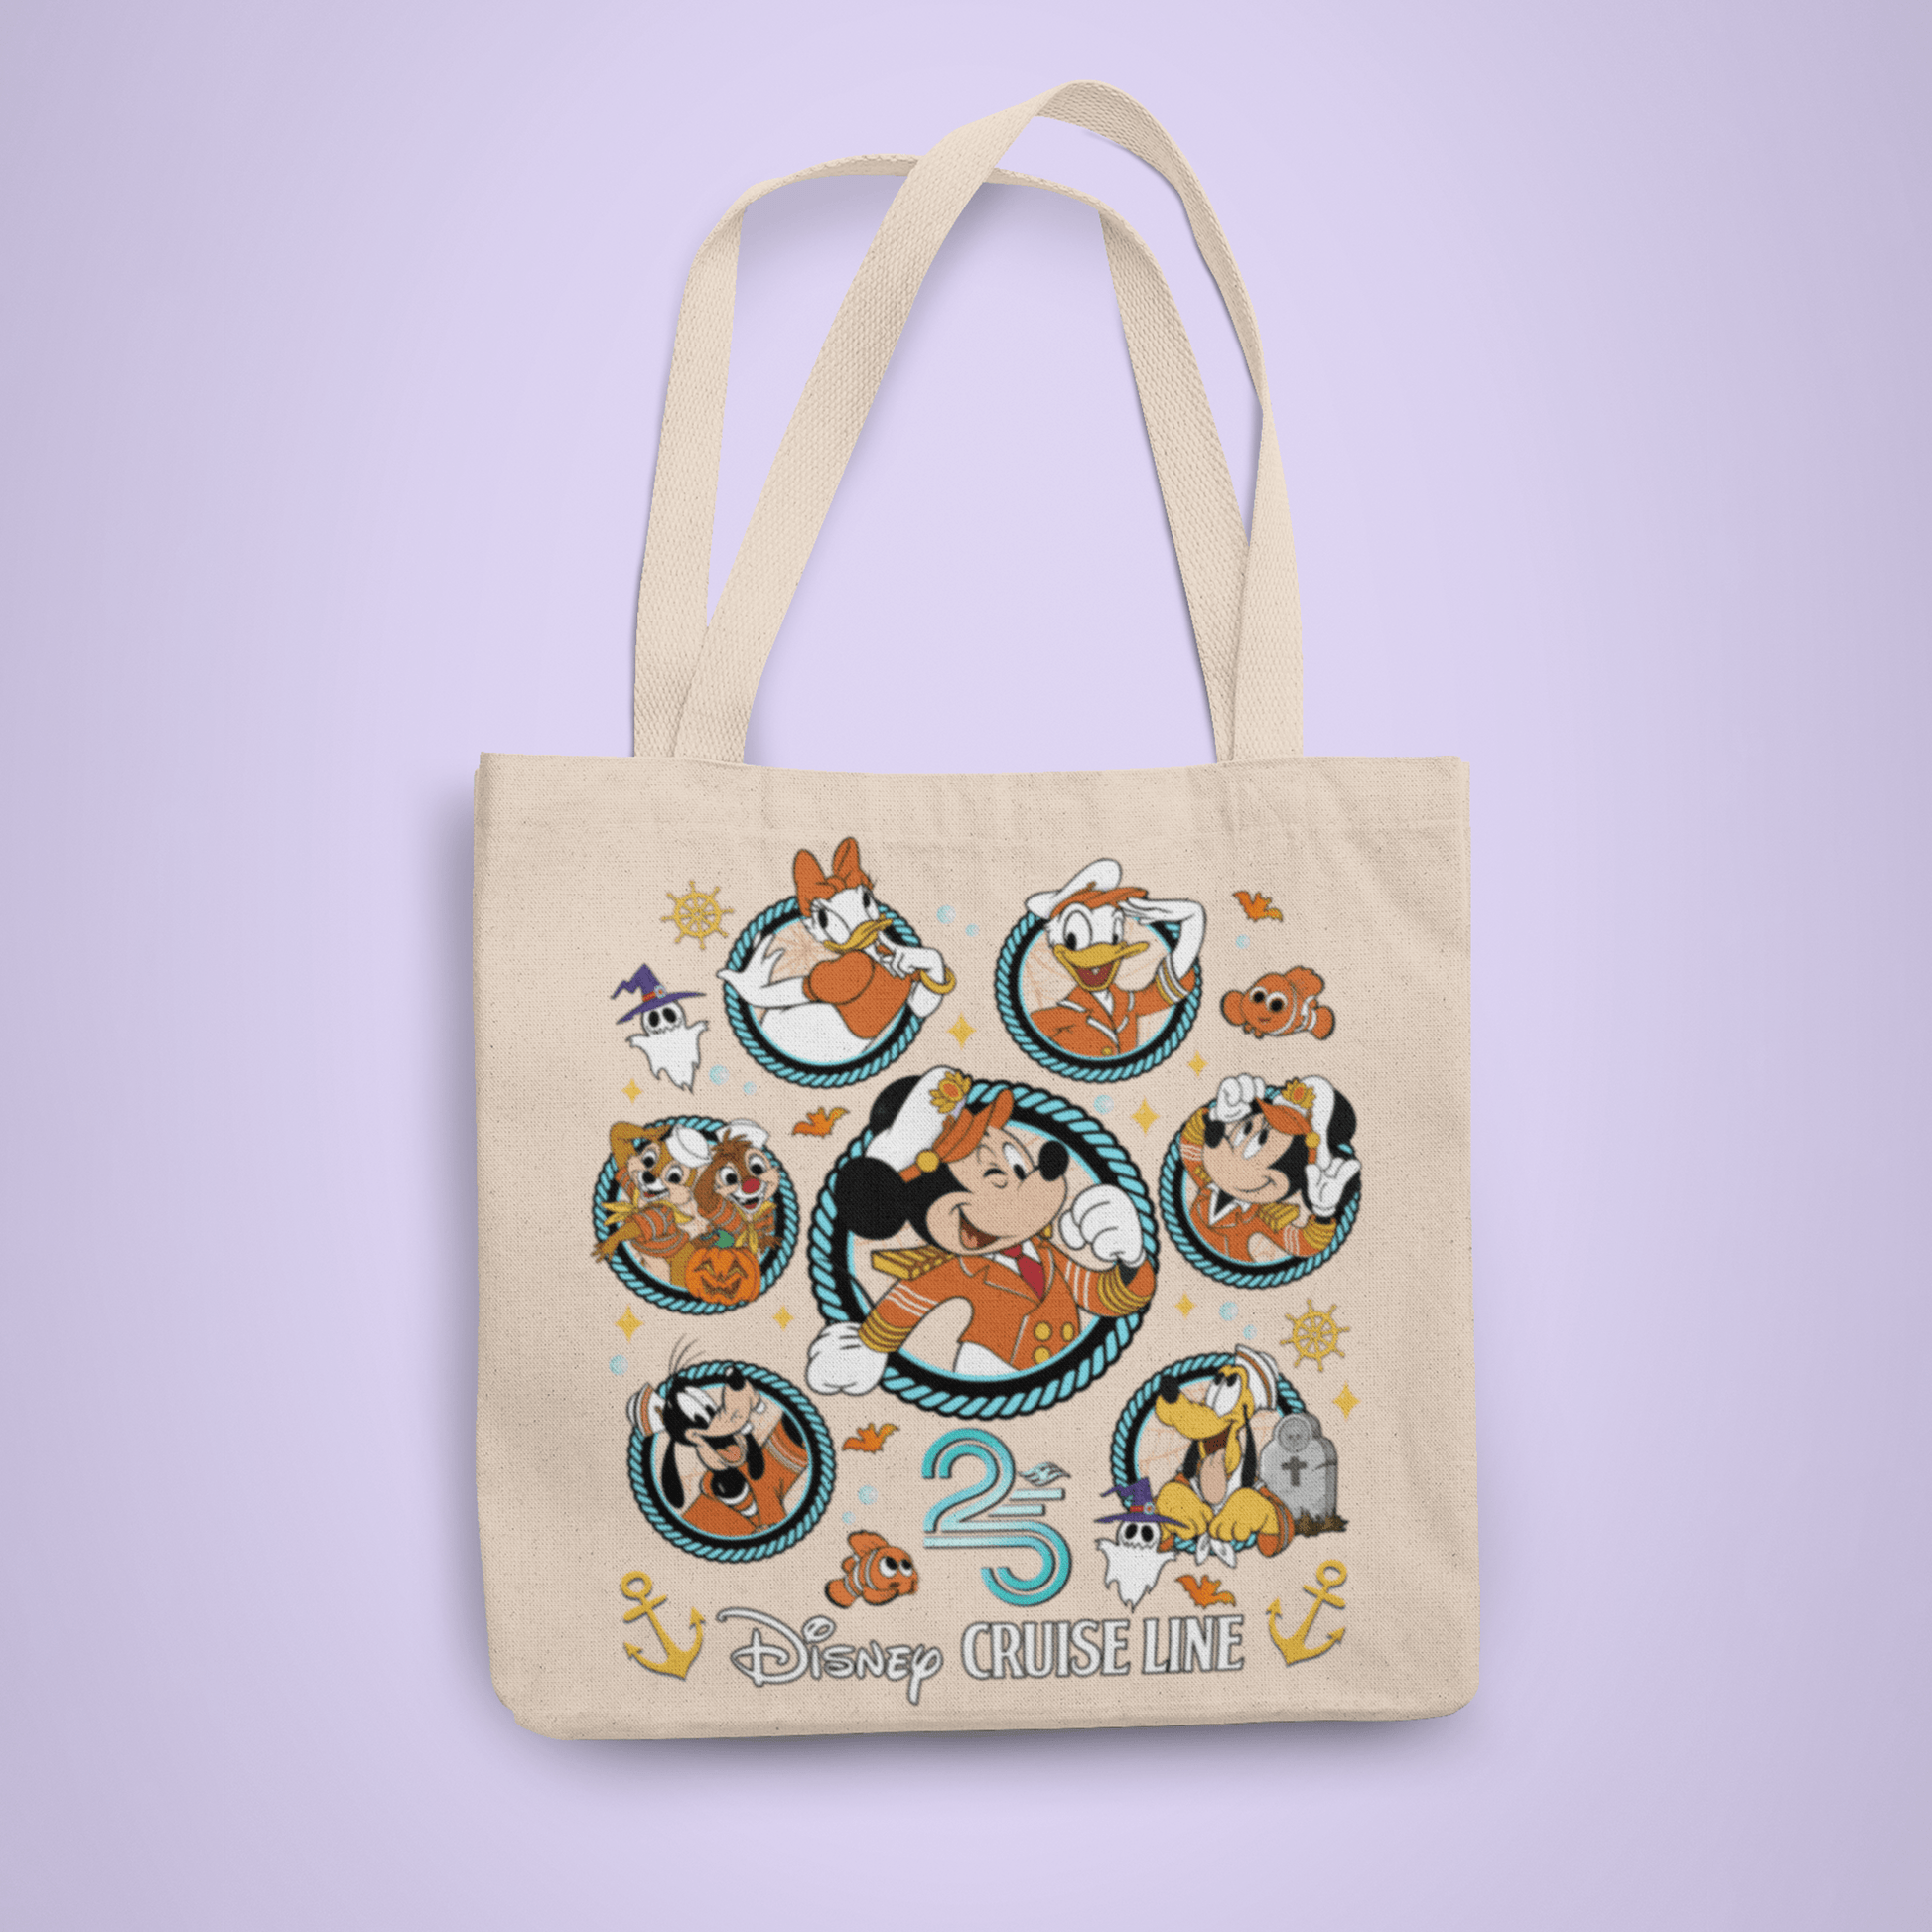 Disney Cruise Line 25th Anniversary Personalized Halloween Trick or Treat Tote Bag - Two Crafty Gays